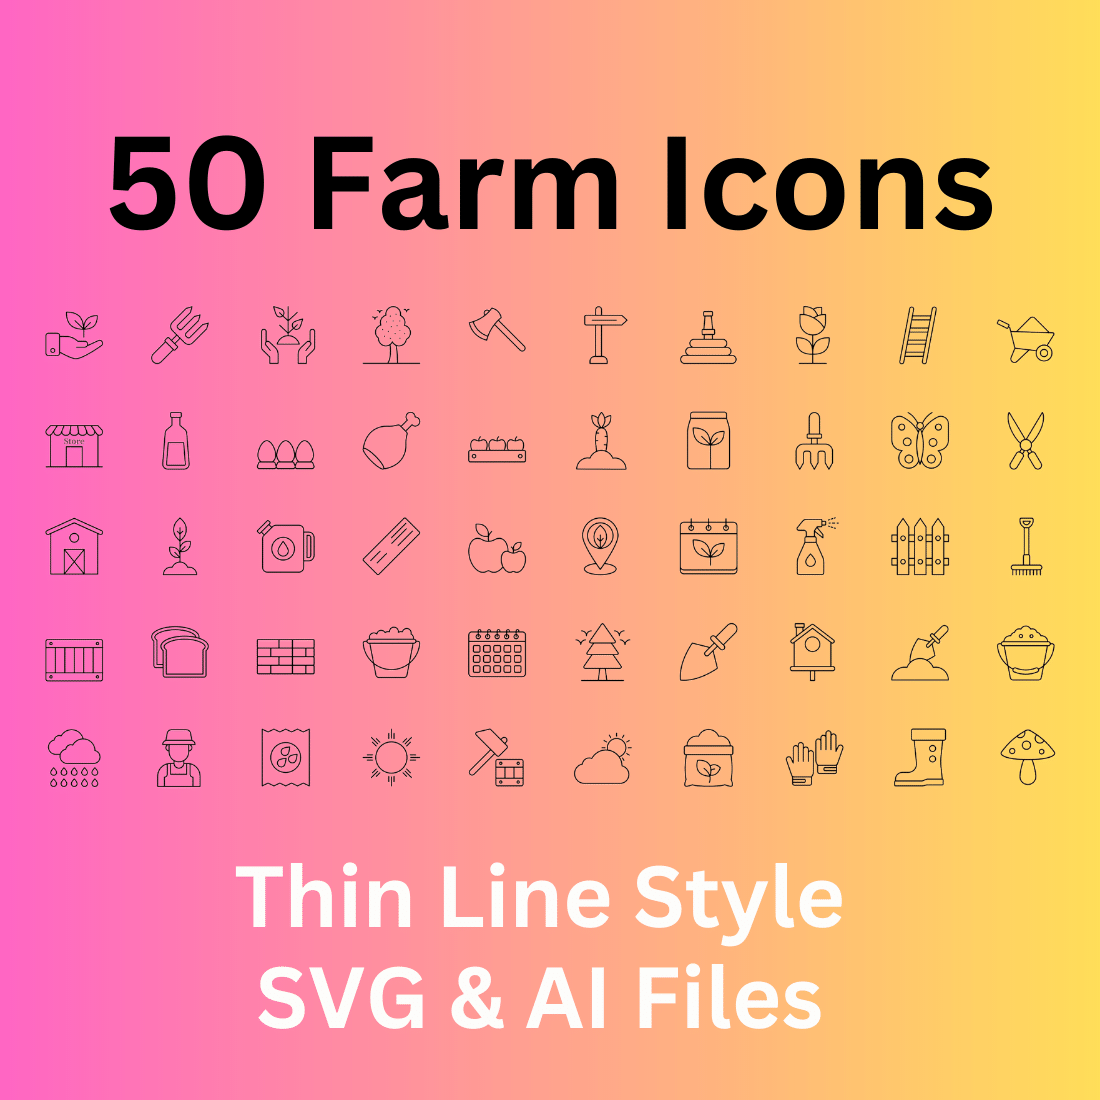 Farm Icon Set 50 Outline Icons - SVG And AI Files cover image.